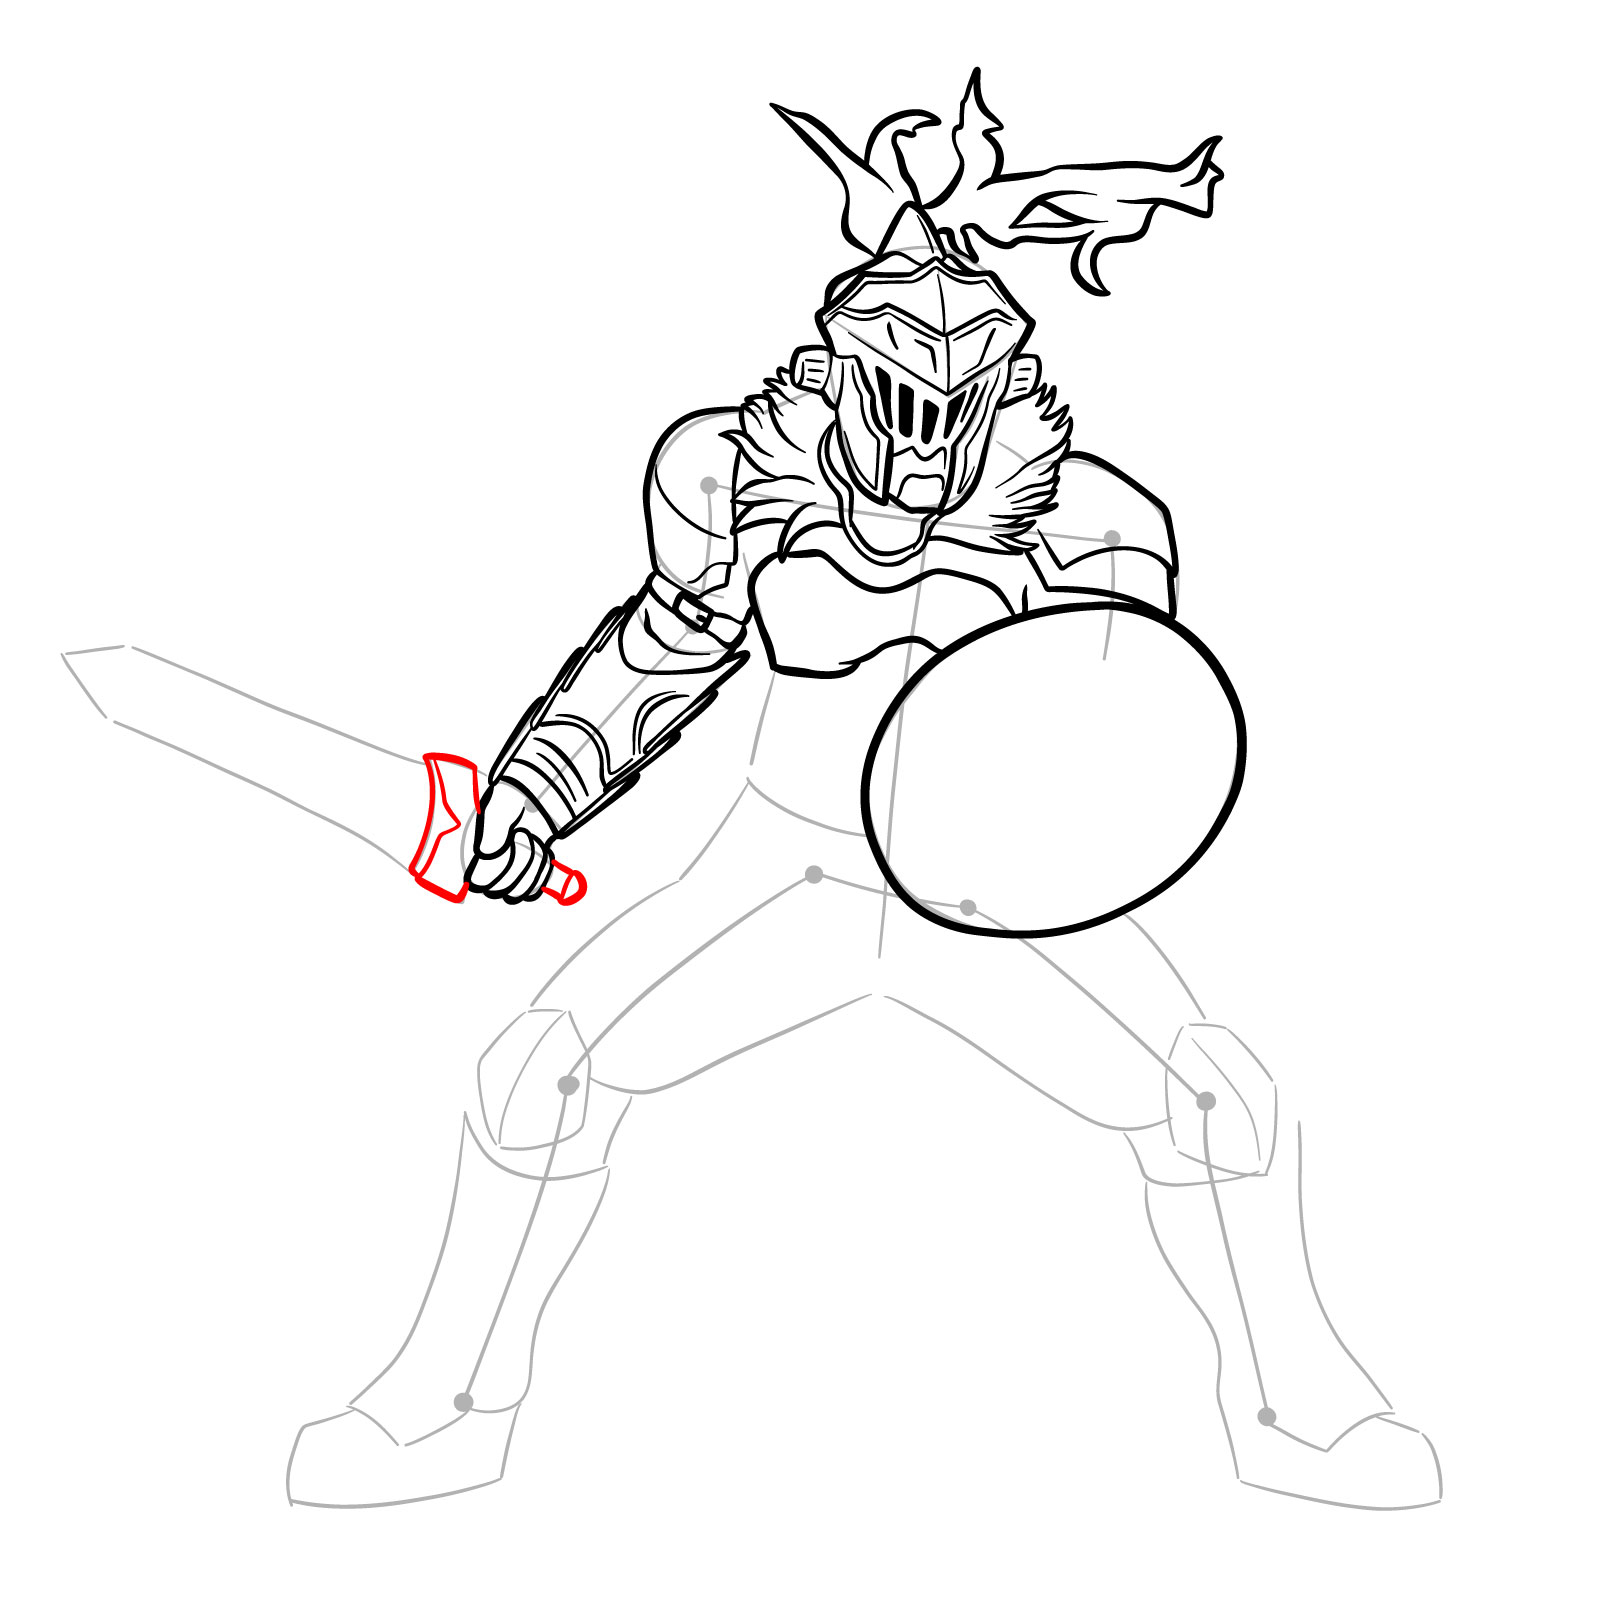 How to Draw Goblin Slayer in battle stance - step 22